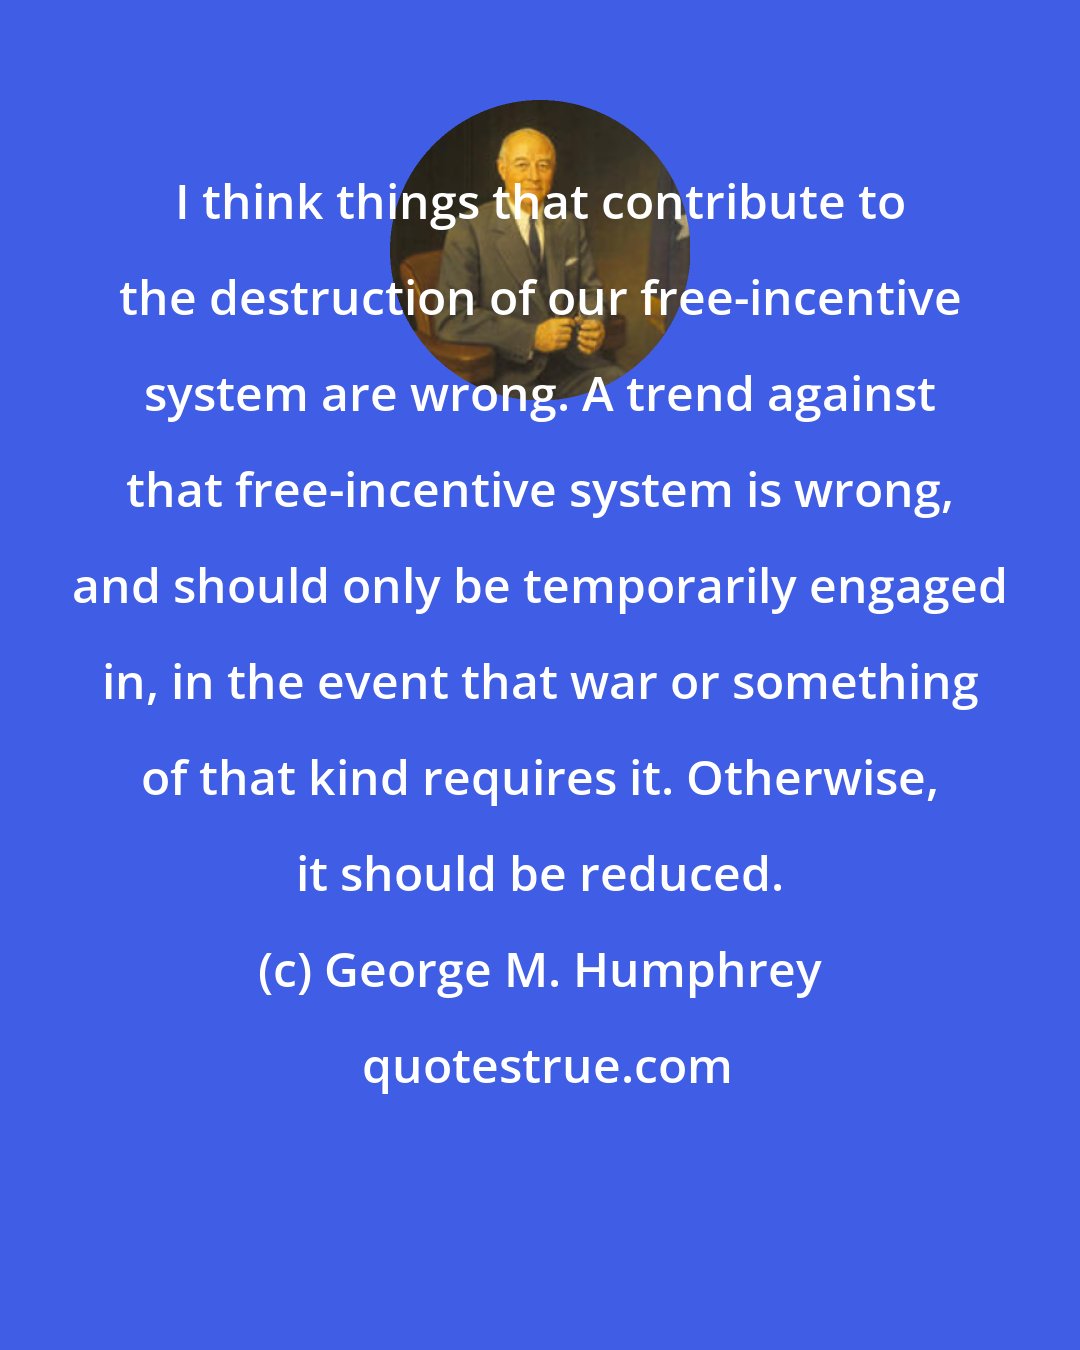 George M. Humphrey: I think things that contribute to the destruction of our free-incentive system are wrong. A trend against that free-incentive system is wrong, and should only be temporarily engaged in, in the event that war or something of that kind requires it. Otherwise, it should be reduced.